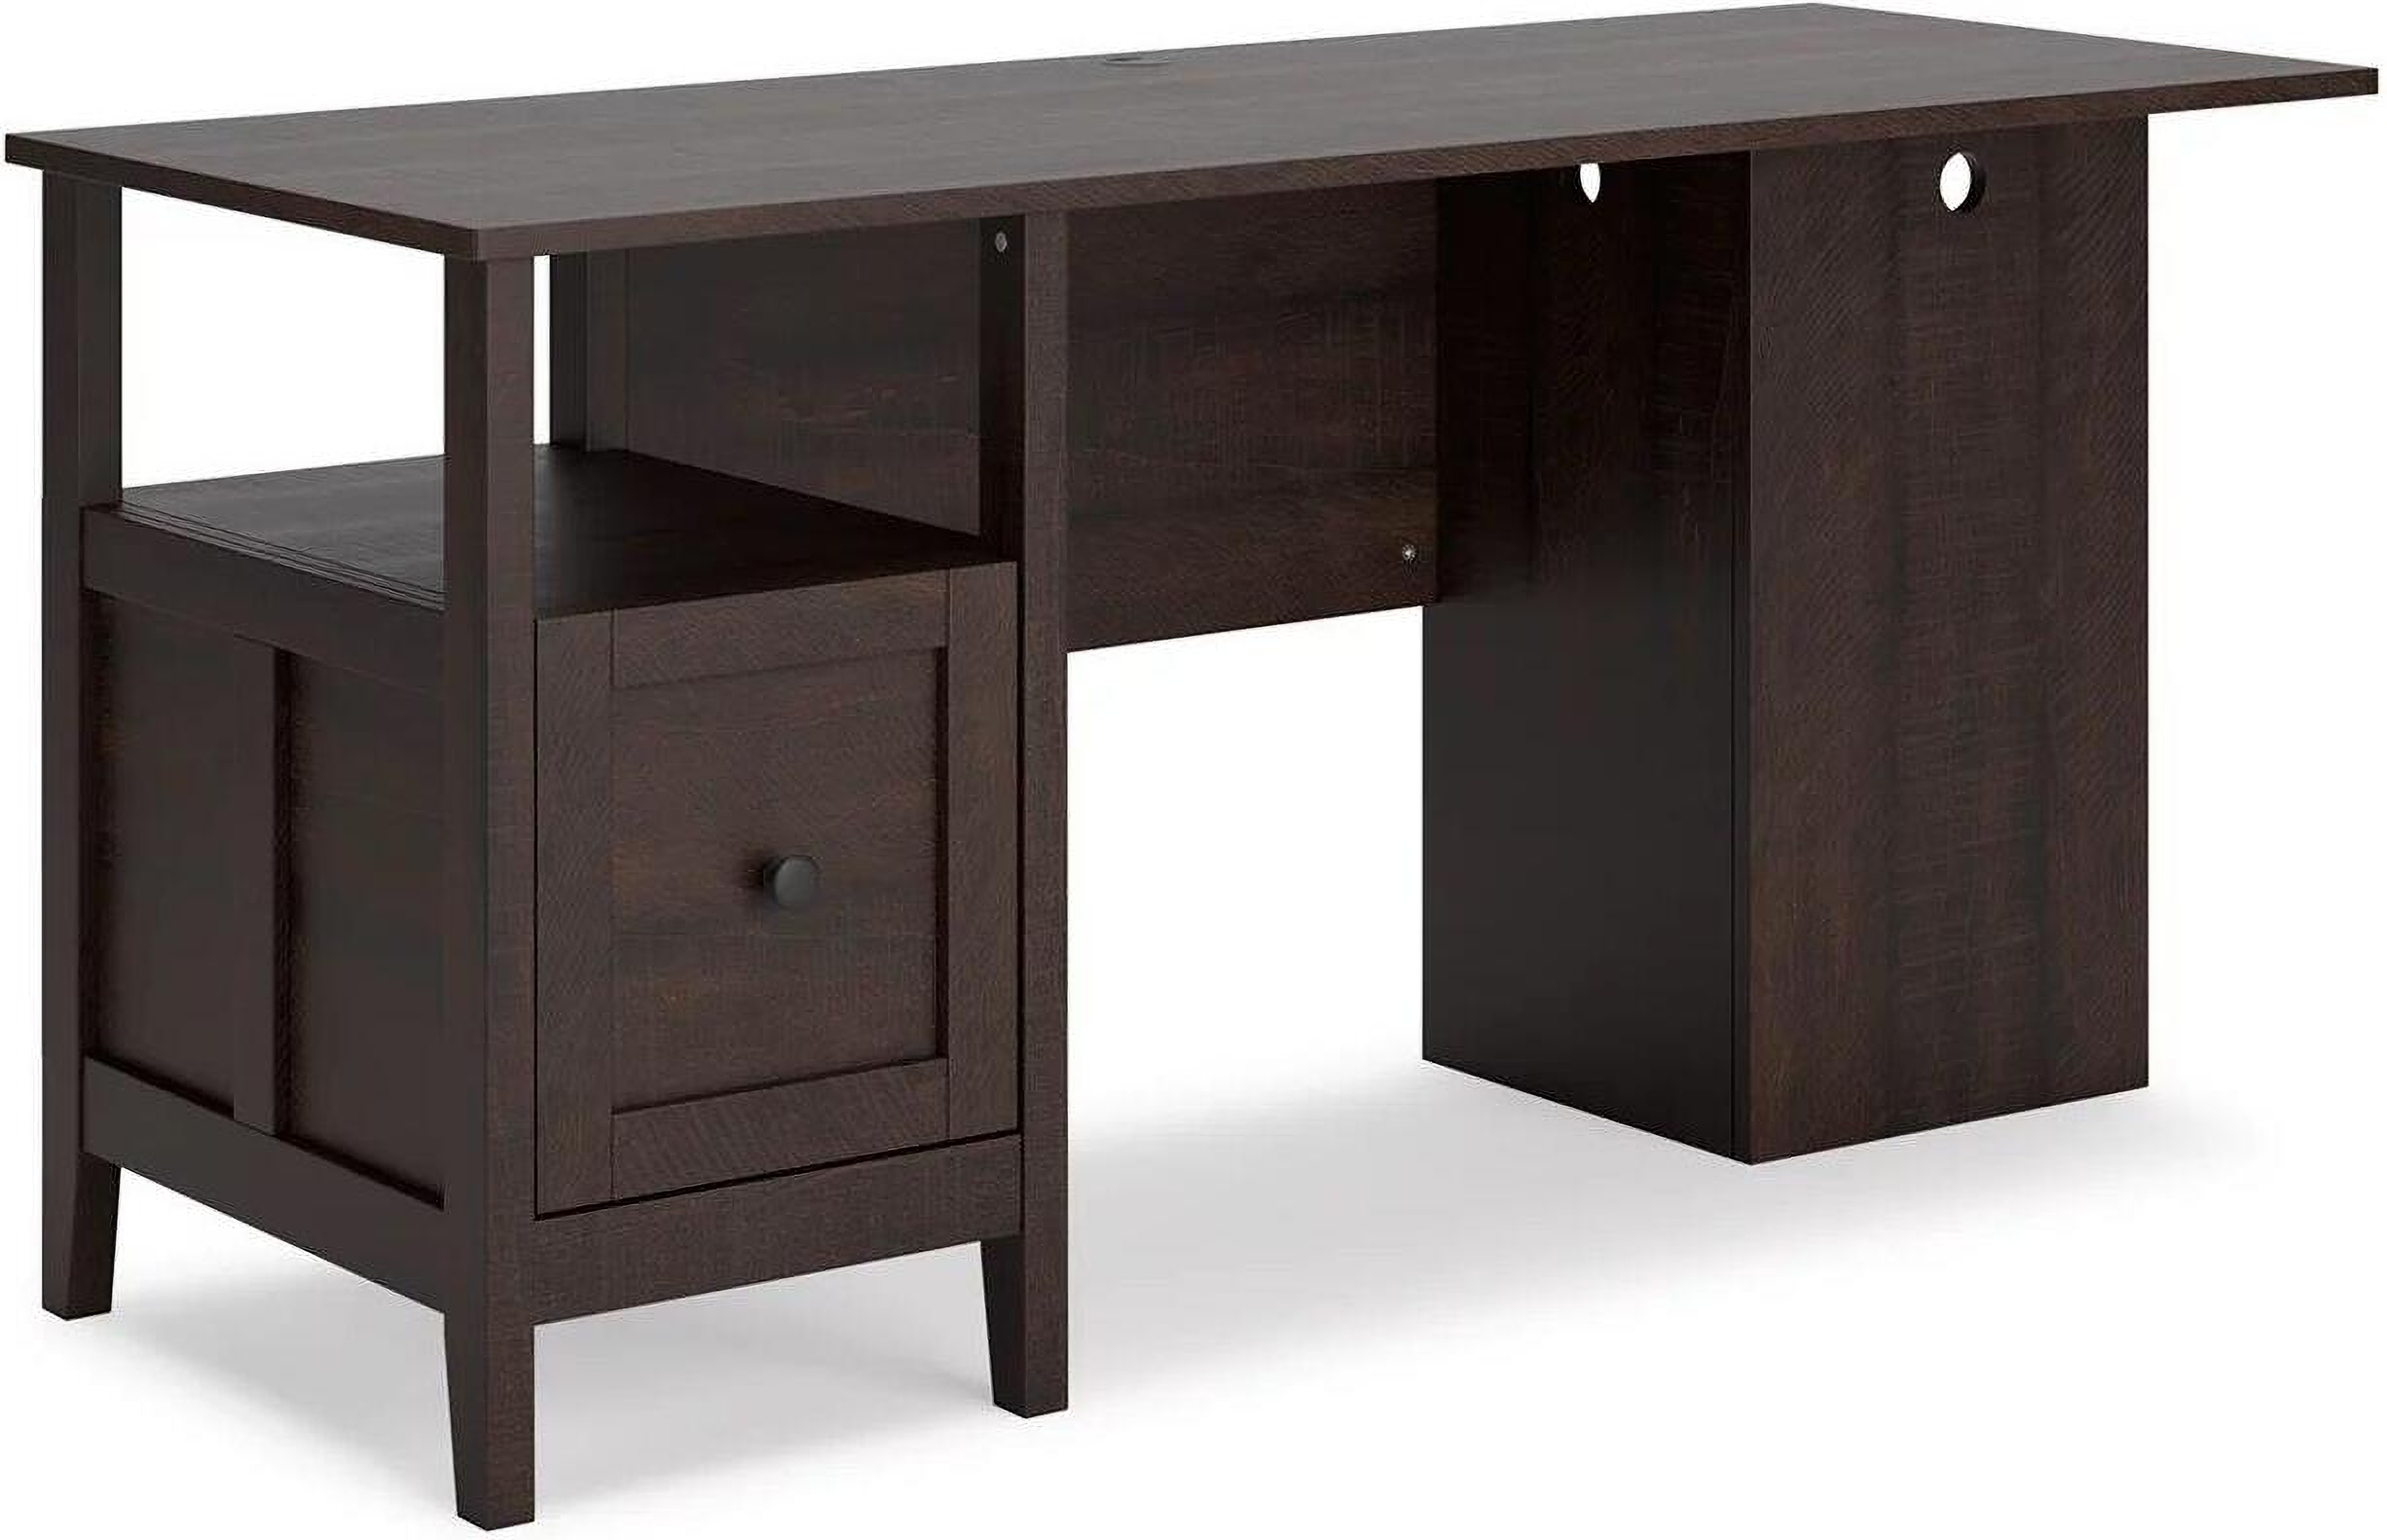 https://cdn.1stopbedrooms.com/media/i/raw/catalog/product/c/a/camiburg-58-inch-home-office-desk-in-warm-brown_qb13456673_6.jpg